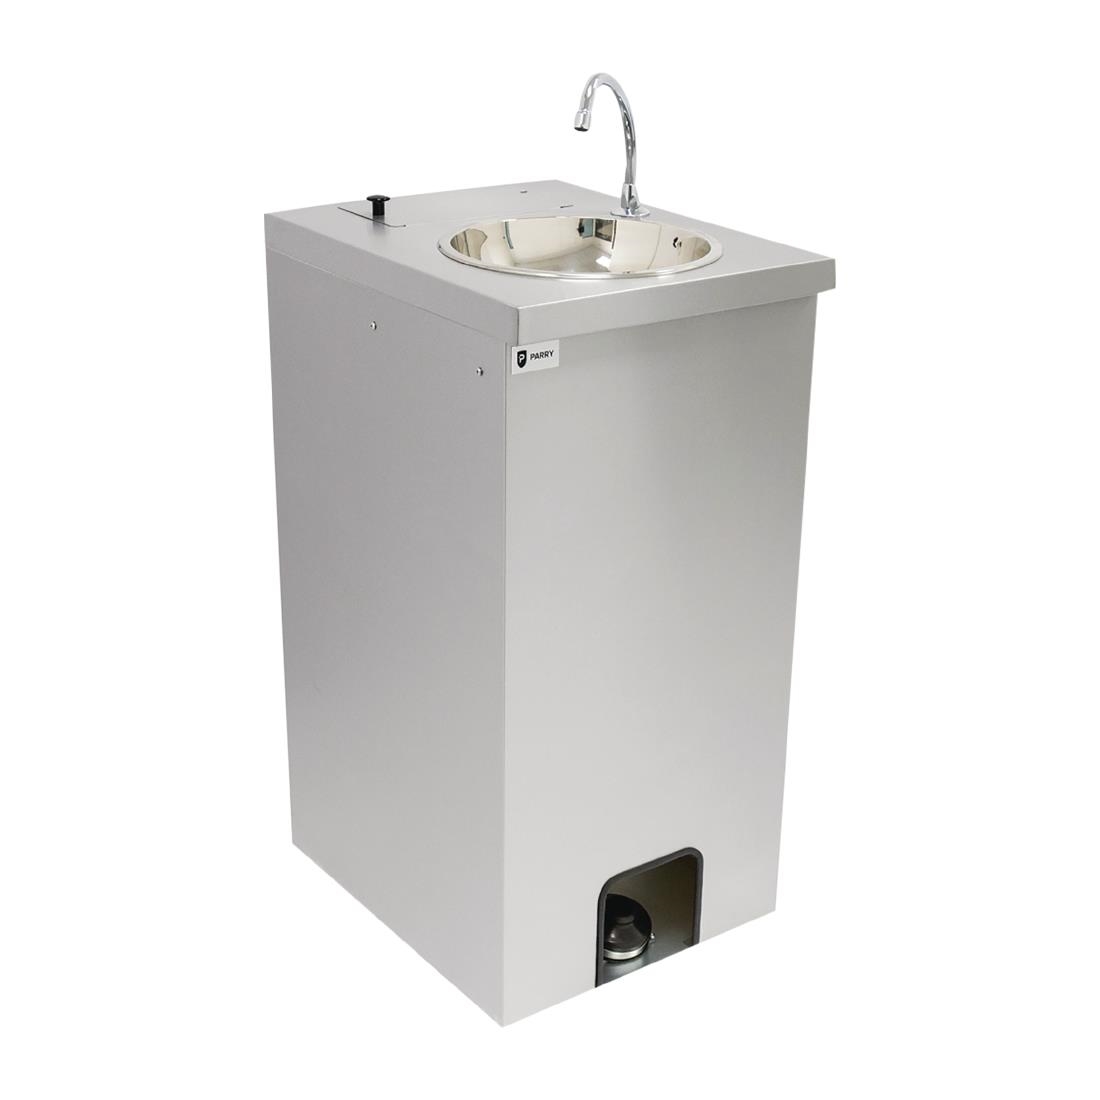 Parry Mobile Cold Water Hand Wash Basin MWBTC